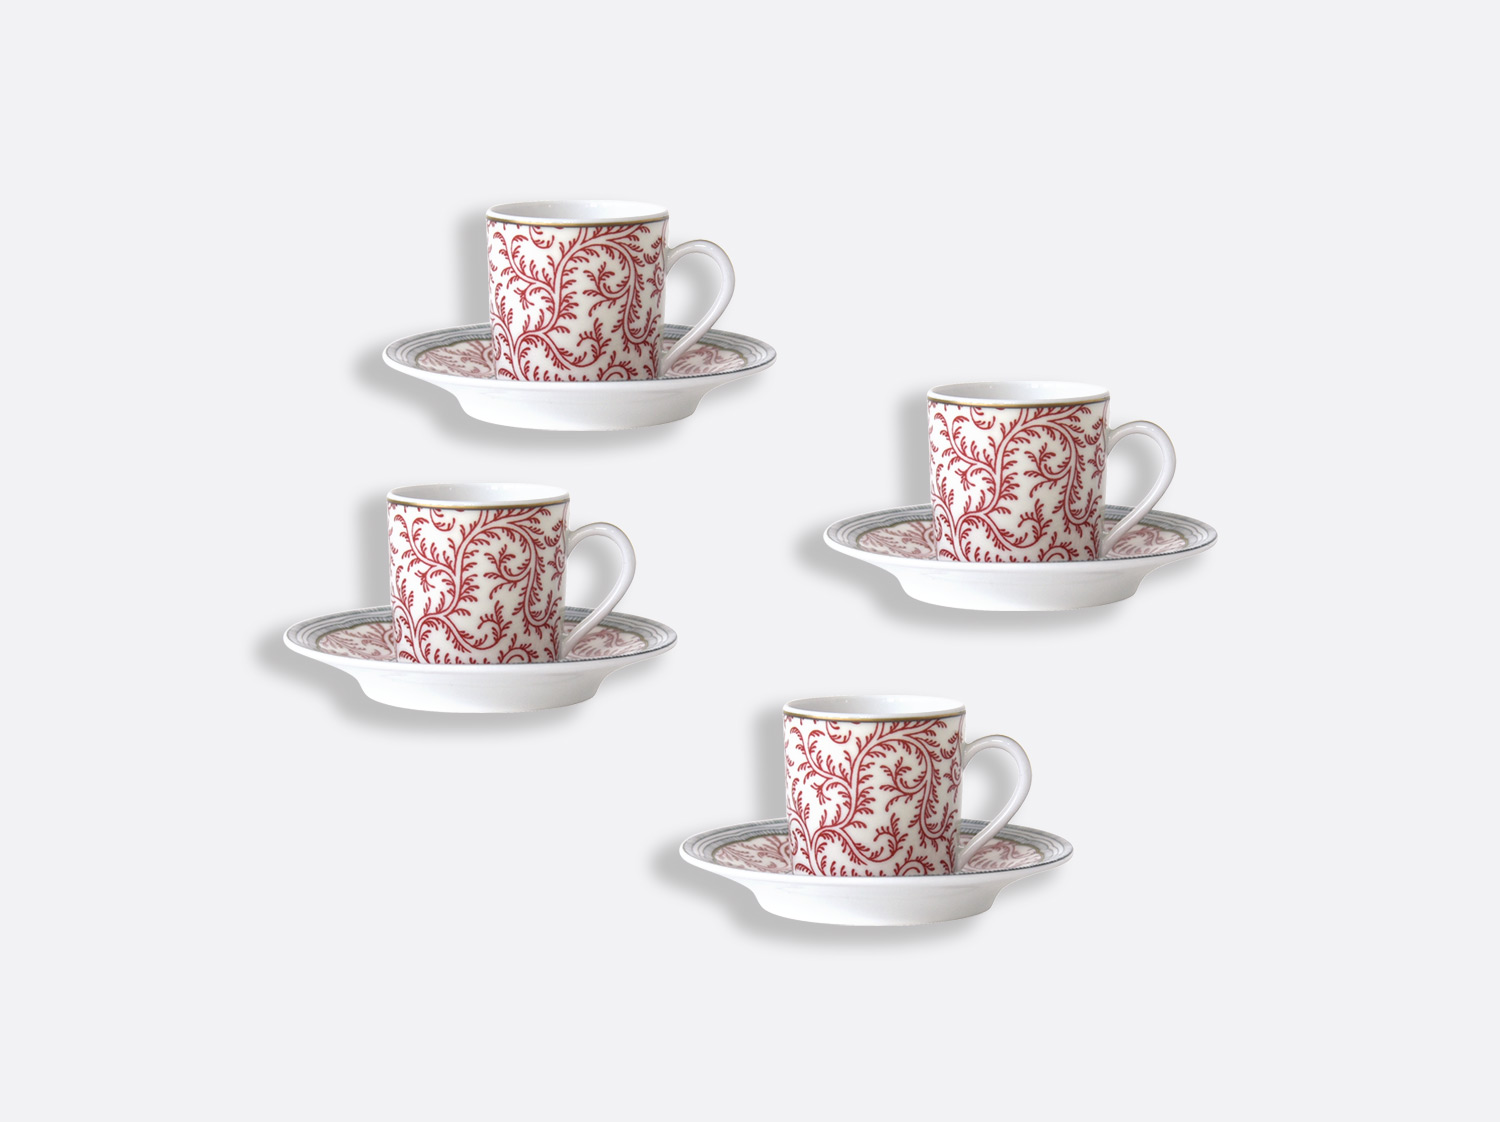 China set of 4 of the collection Collection Braquenié | Bernardaud